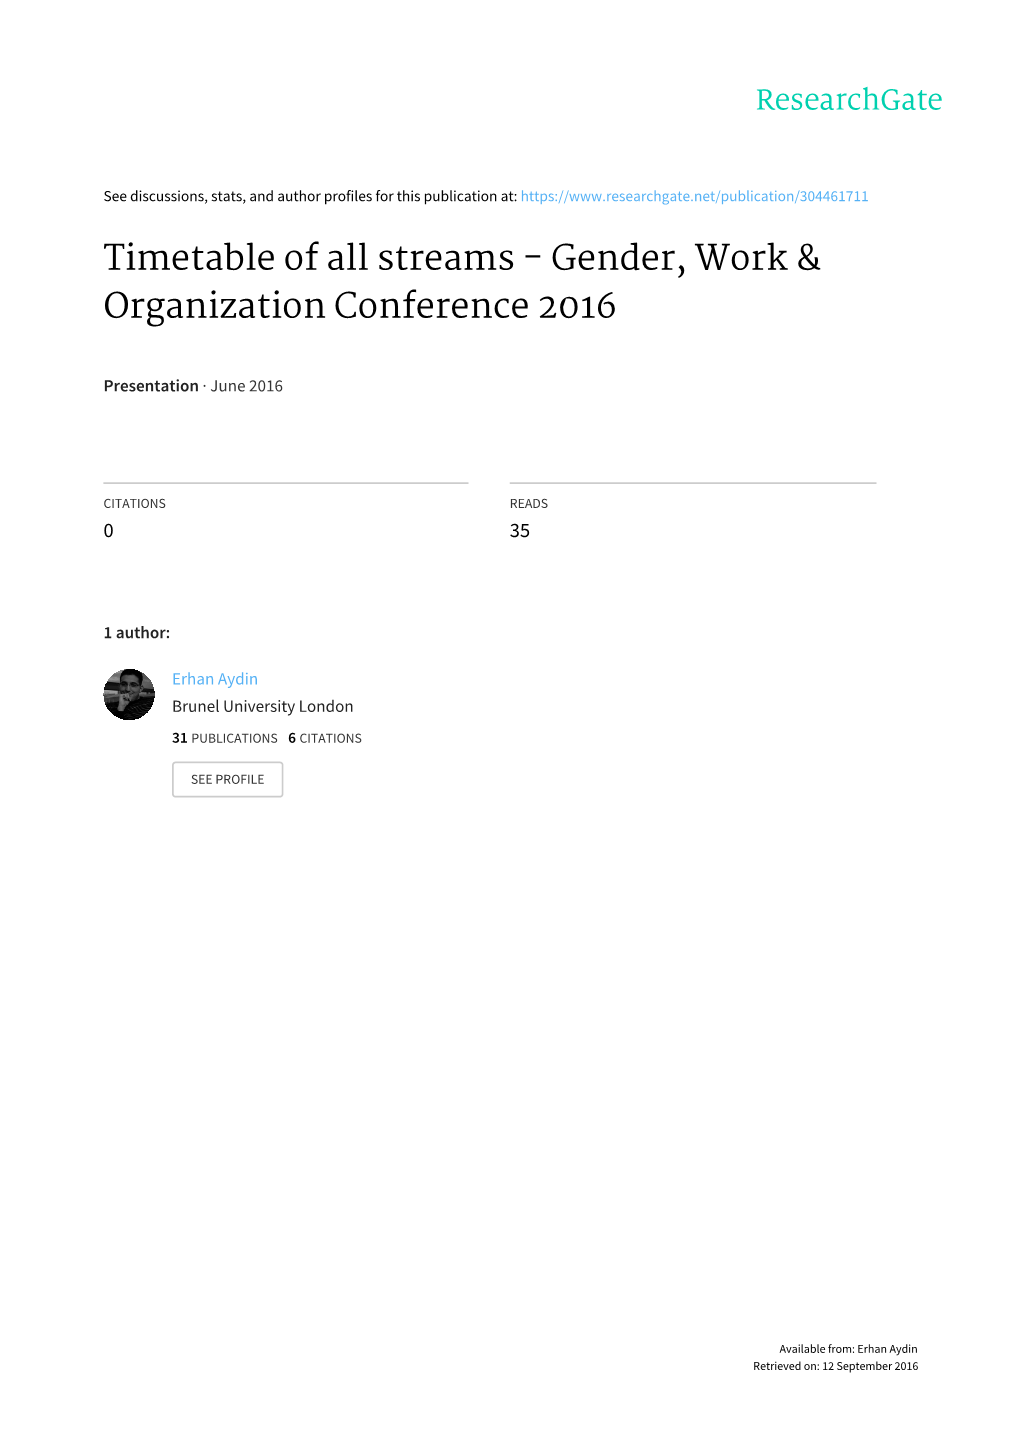 Timetable of All Streams - Gender, Work & Organization Conference 2016